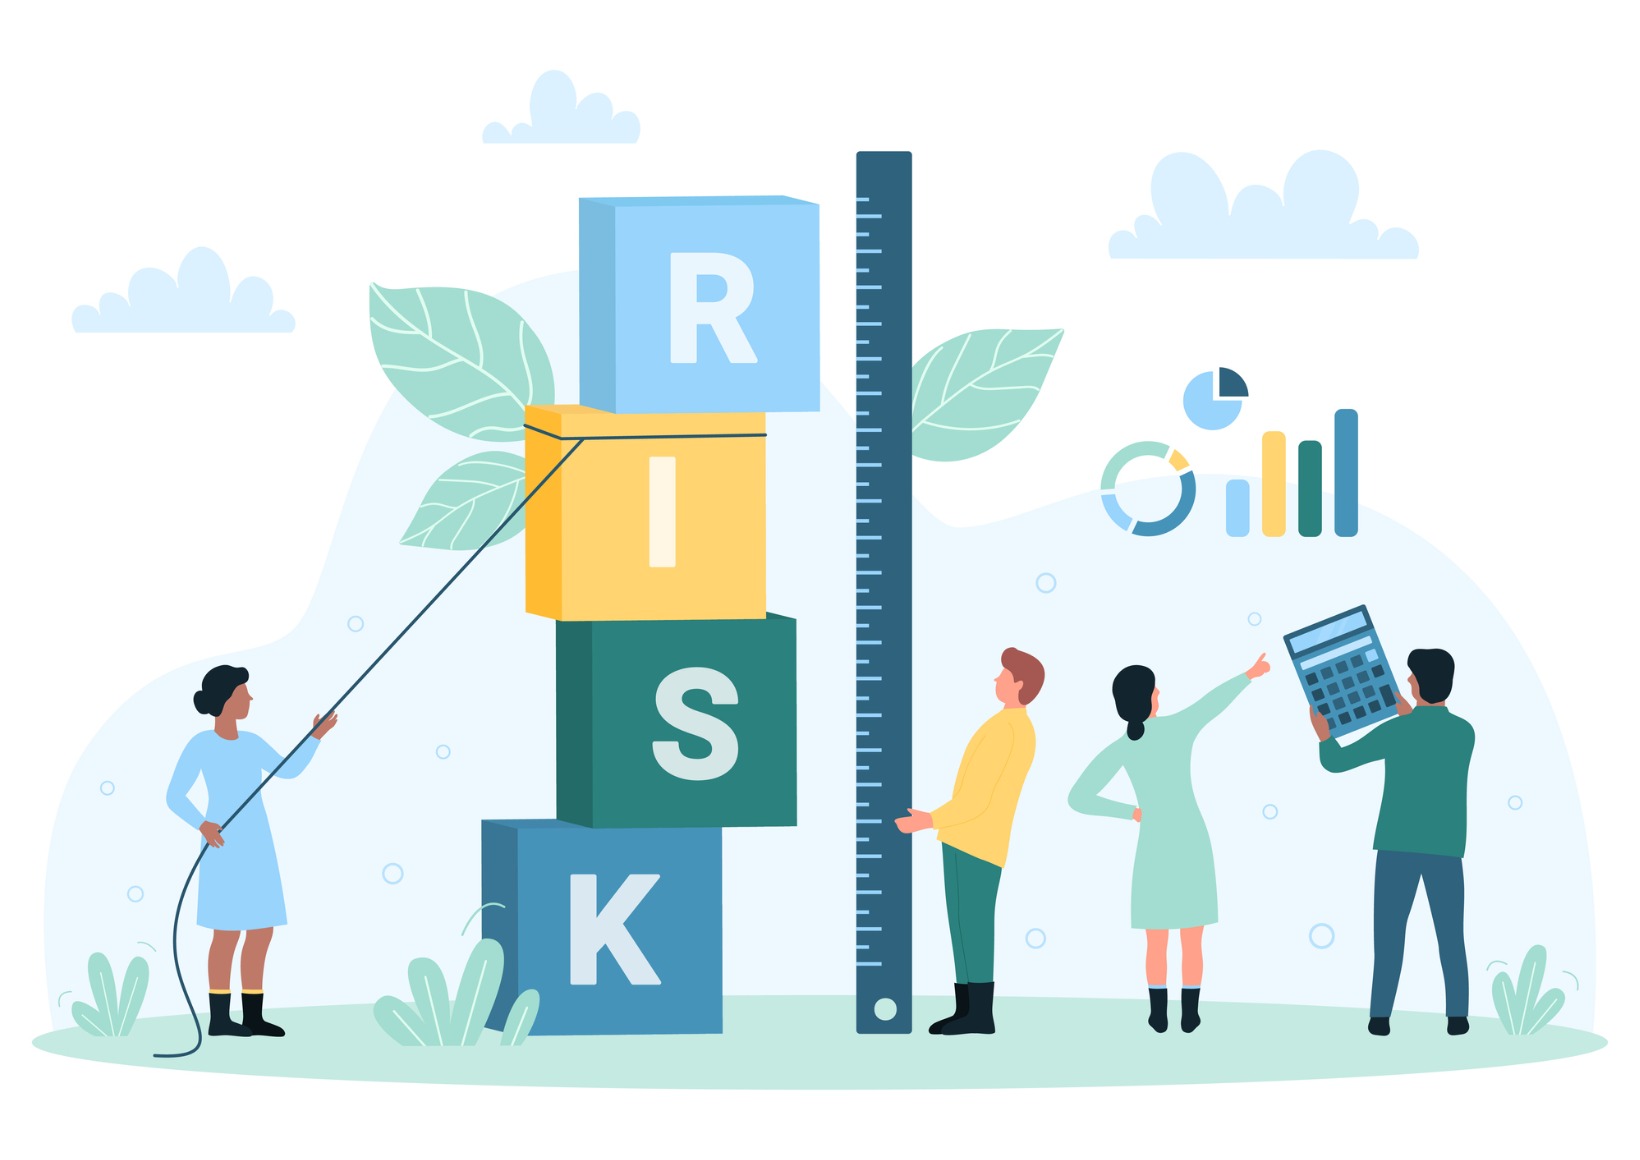 risk-management-control-and-measurement-of-financial-risk-by-tiny-people-with-ruler.jpg_s=1024x1024&w=is&k=20&c=tX-xHjZLcSRZtrELBSjor-ZyssxvRSVZQGdl5GLyxaw=